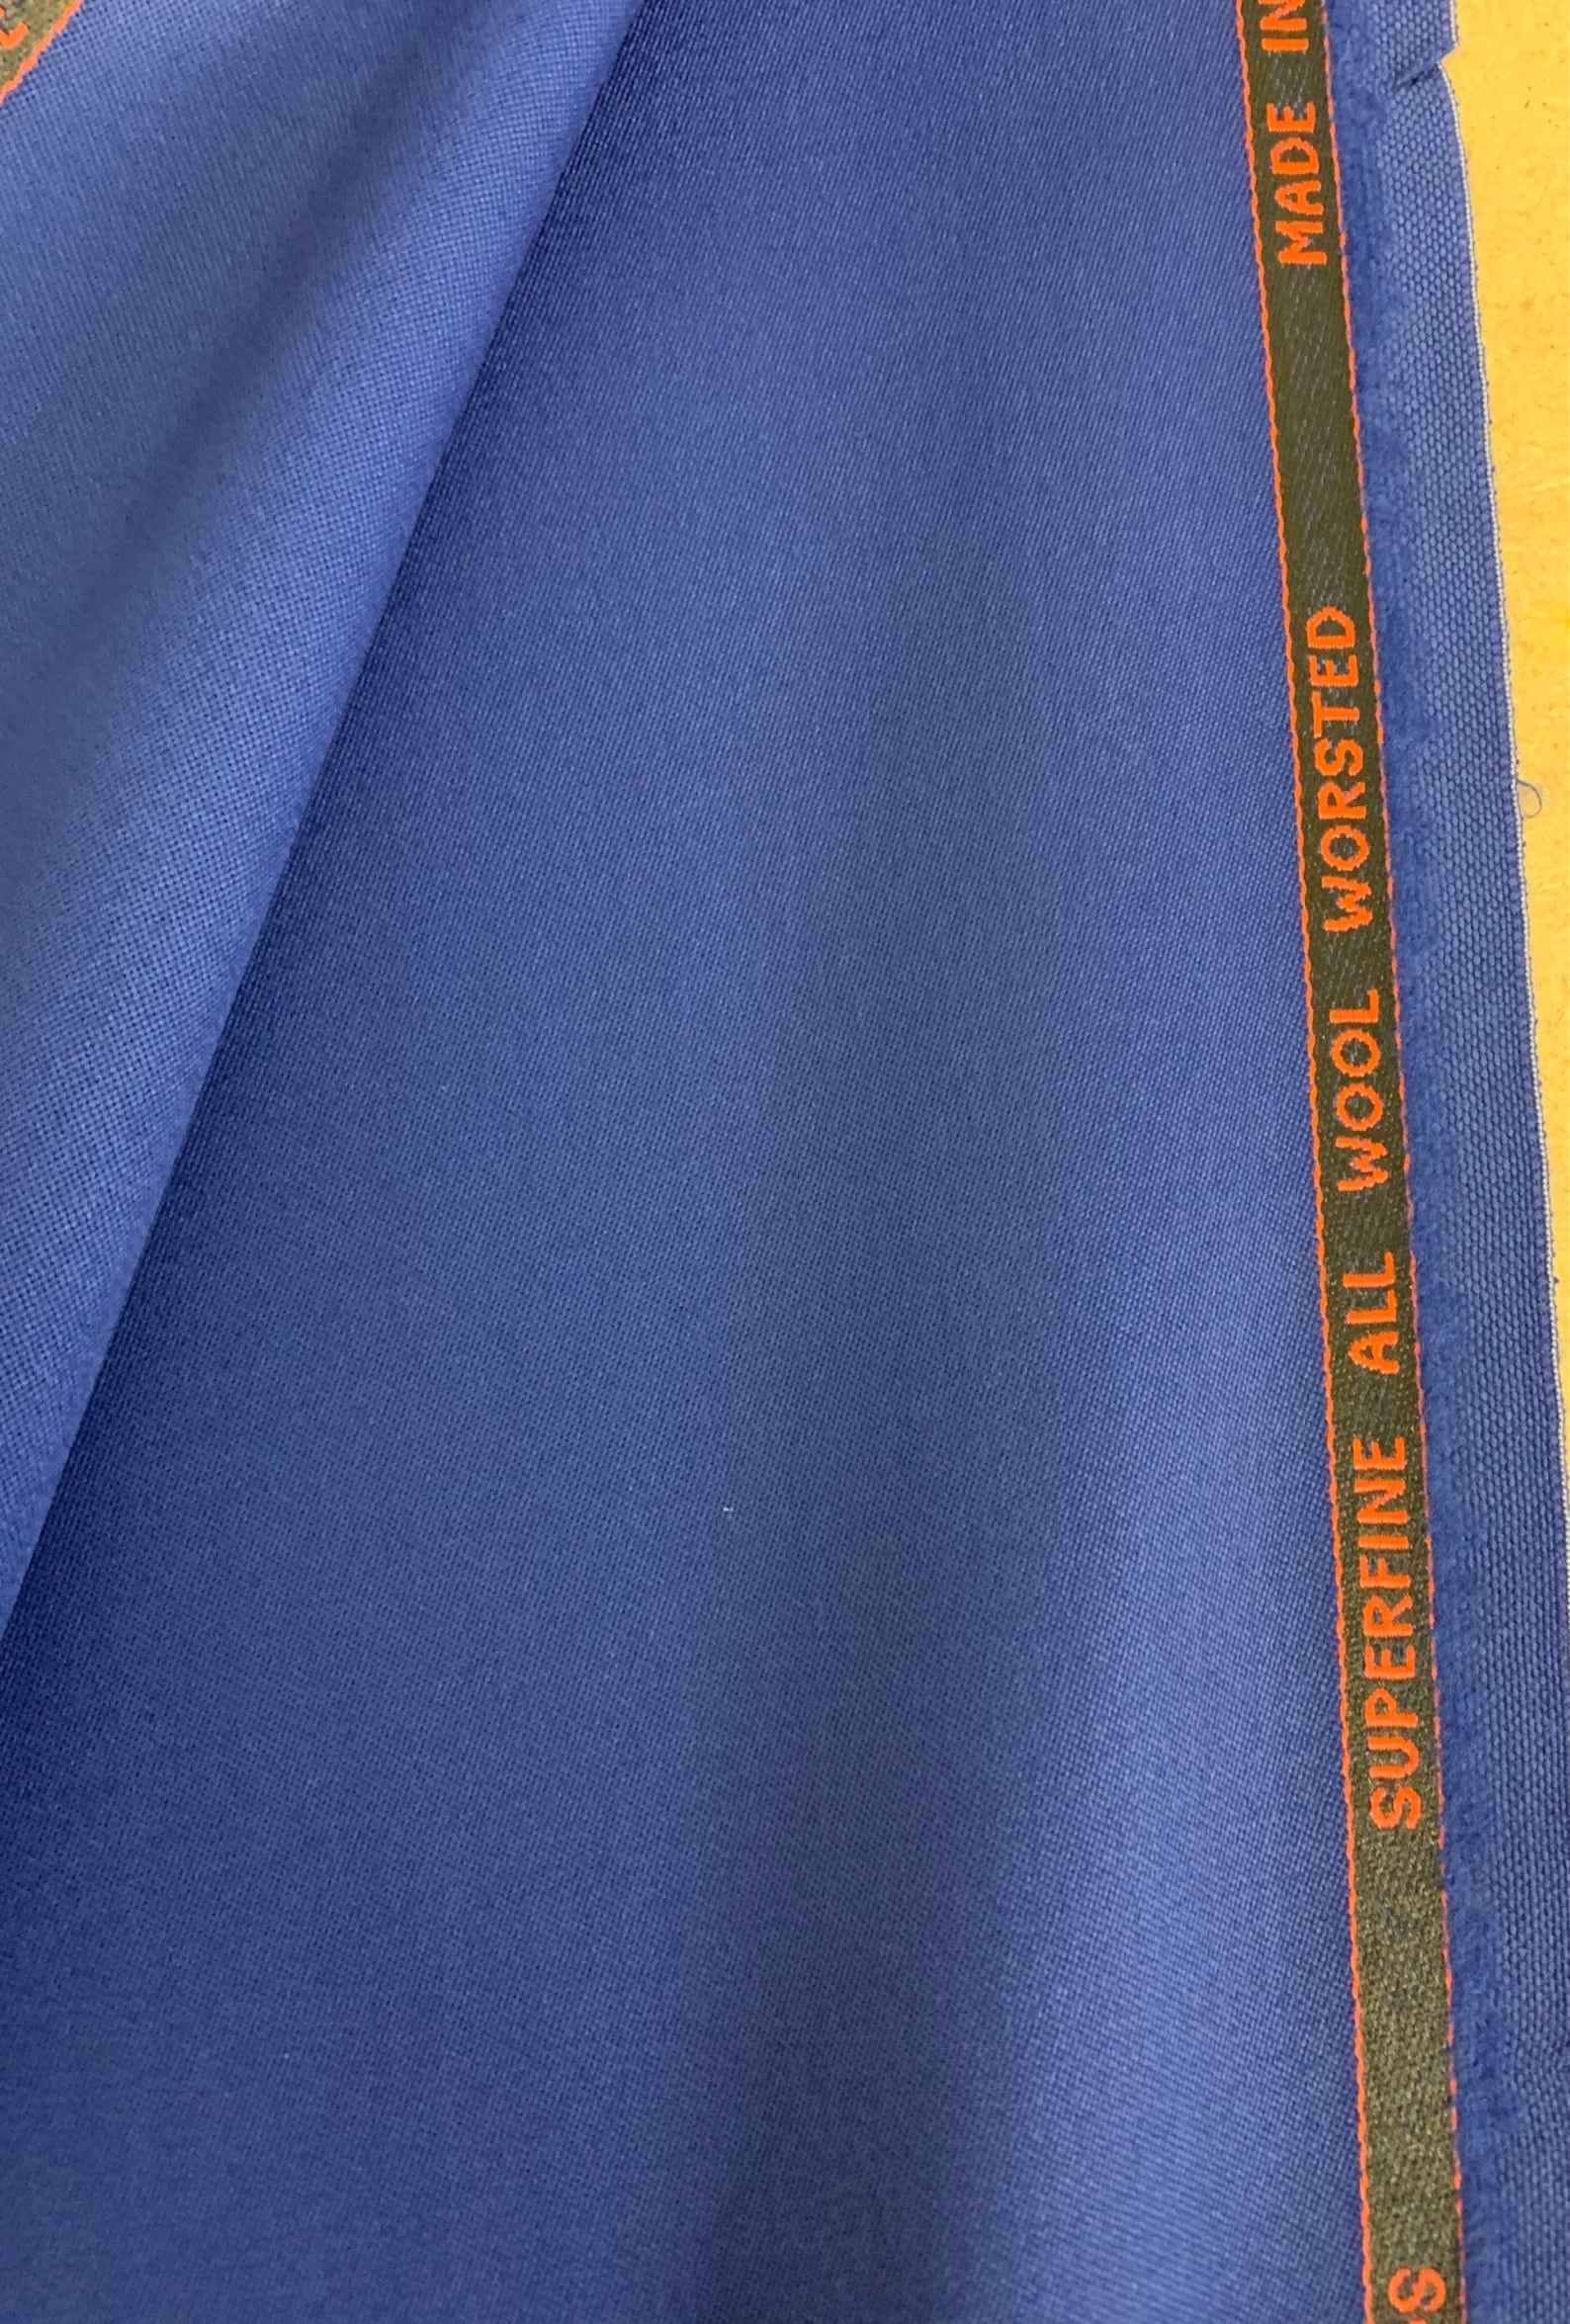 French Navy/Royal Blue 100% Wool Suit Fabric. 420g For Dugdale | Etsy